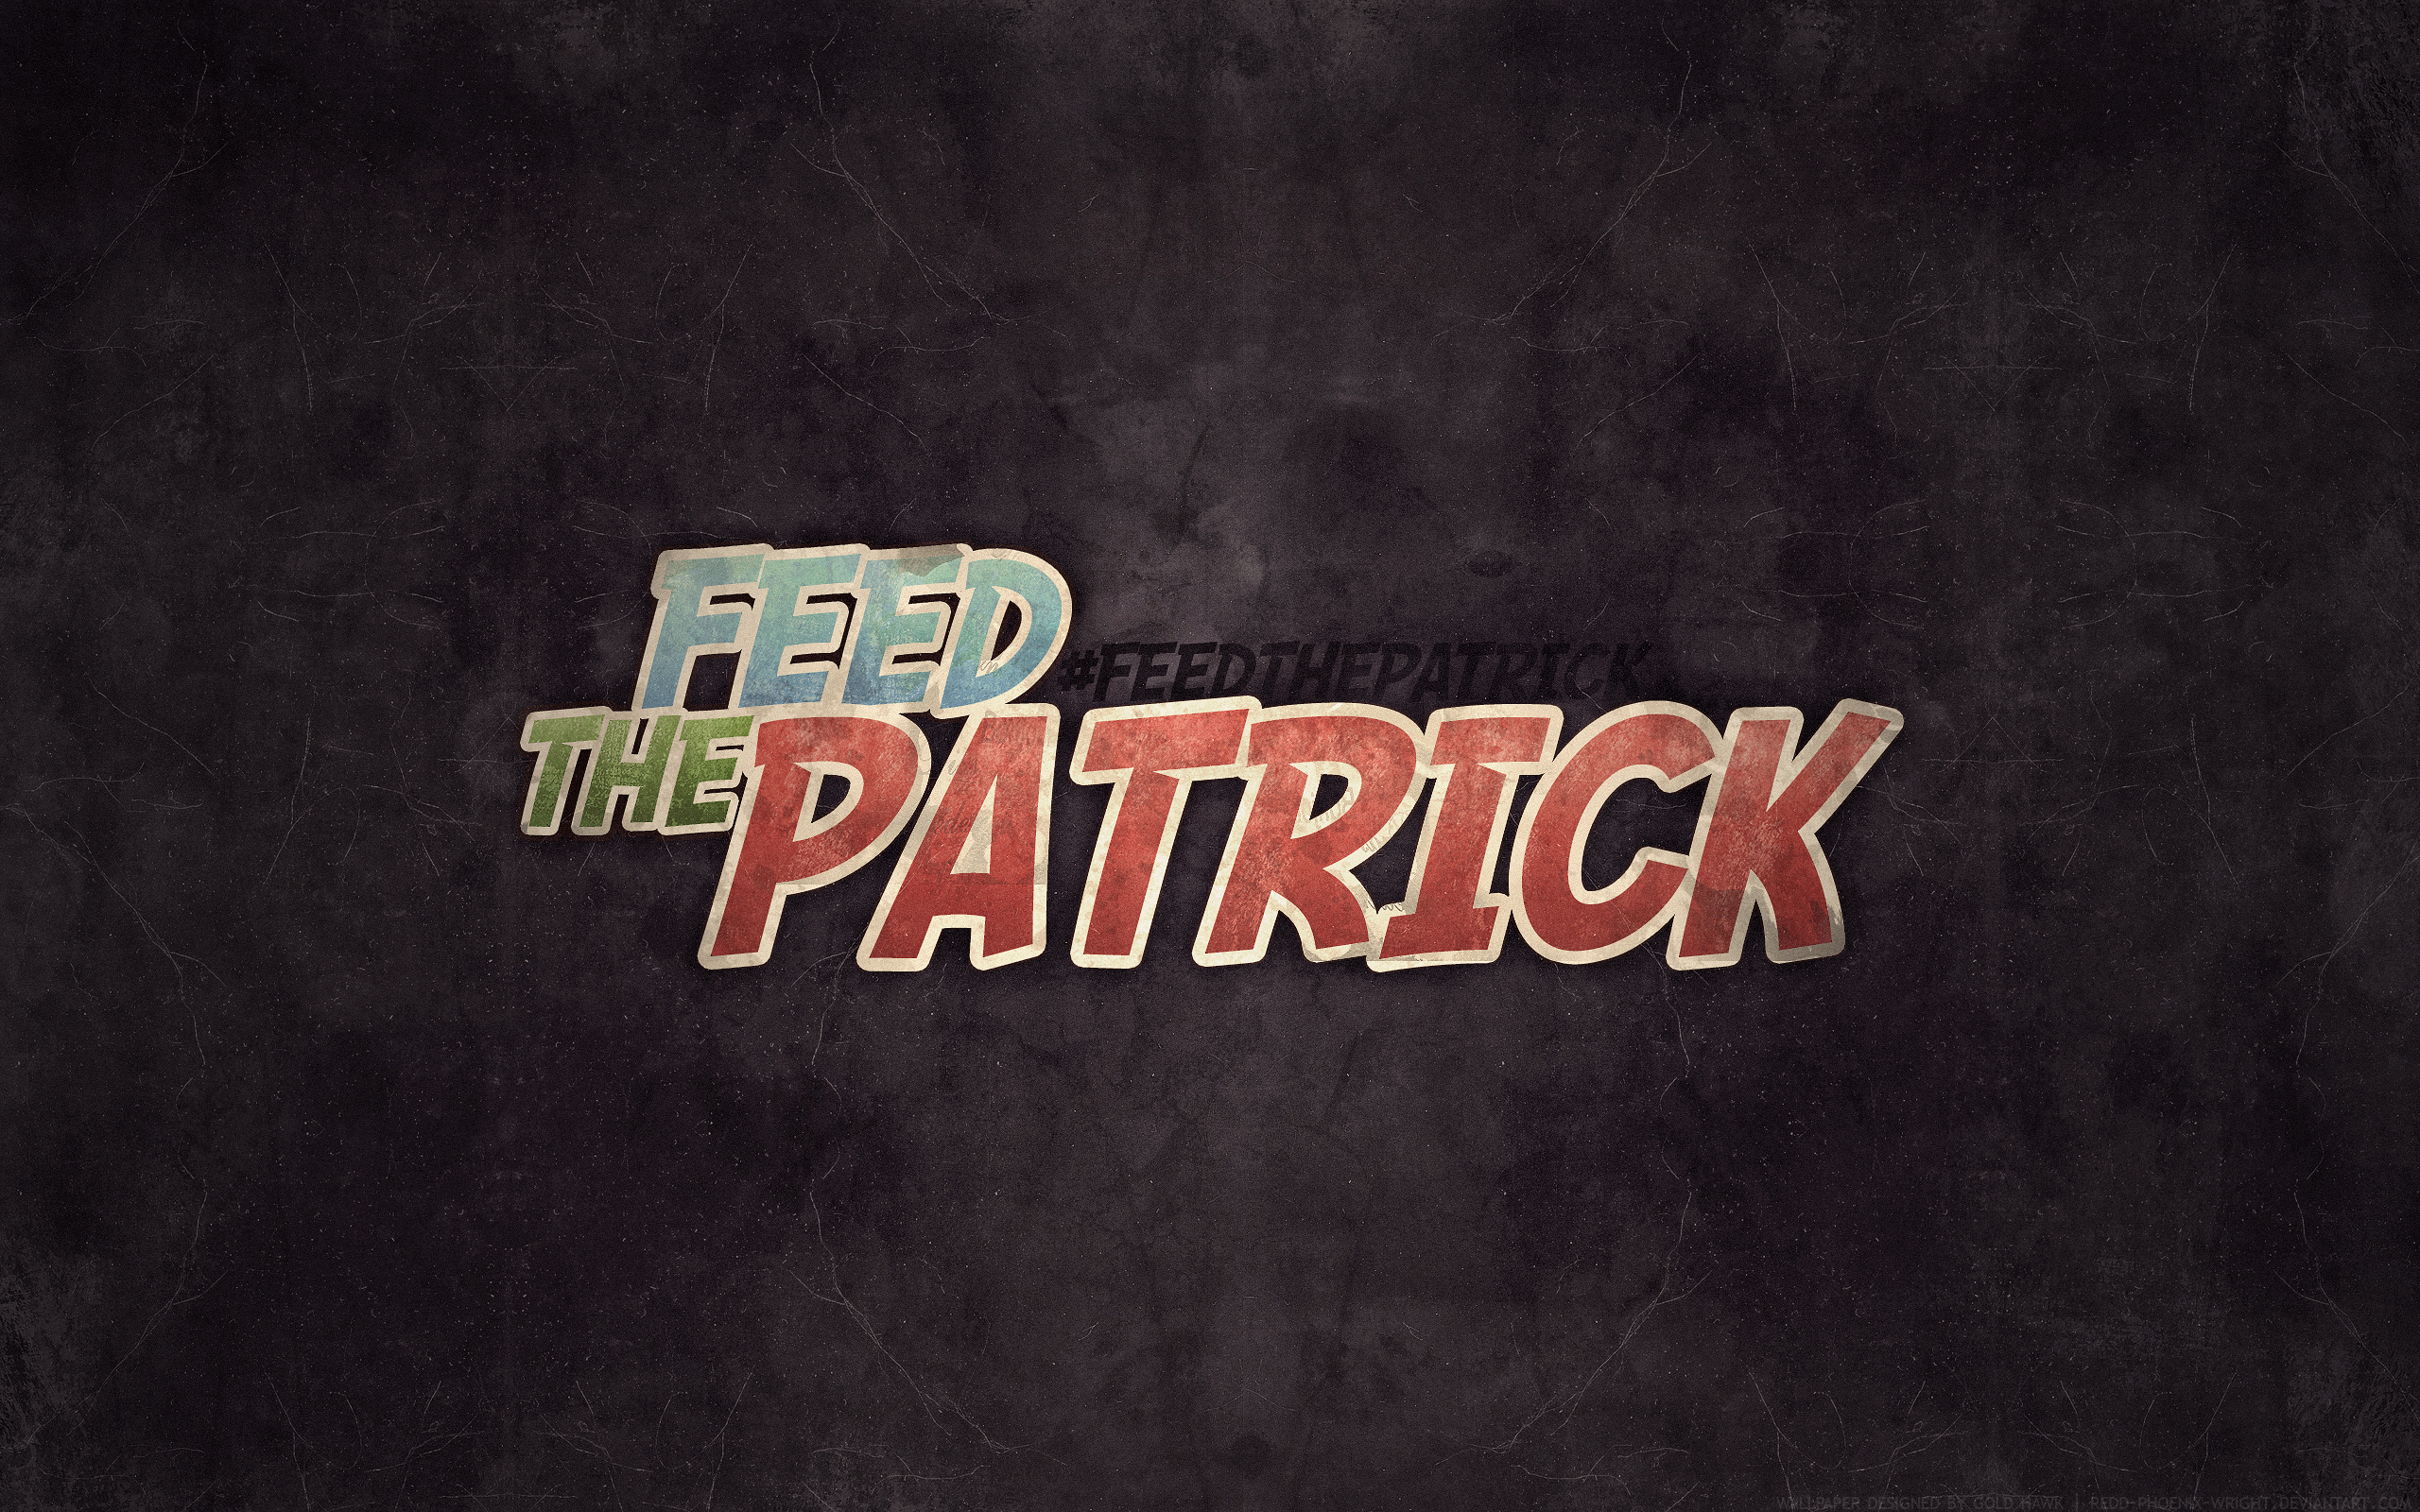 Feed The Patrick Wallpaper Image